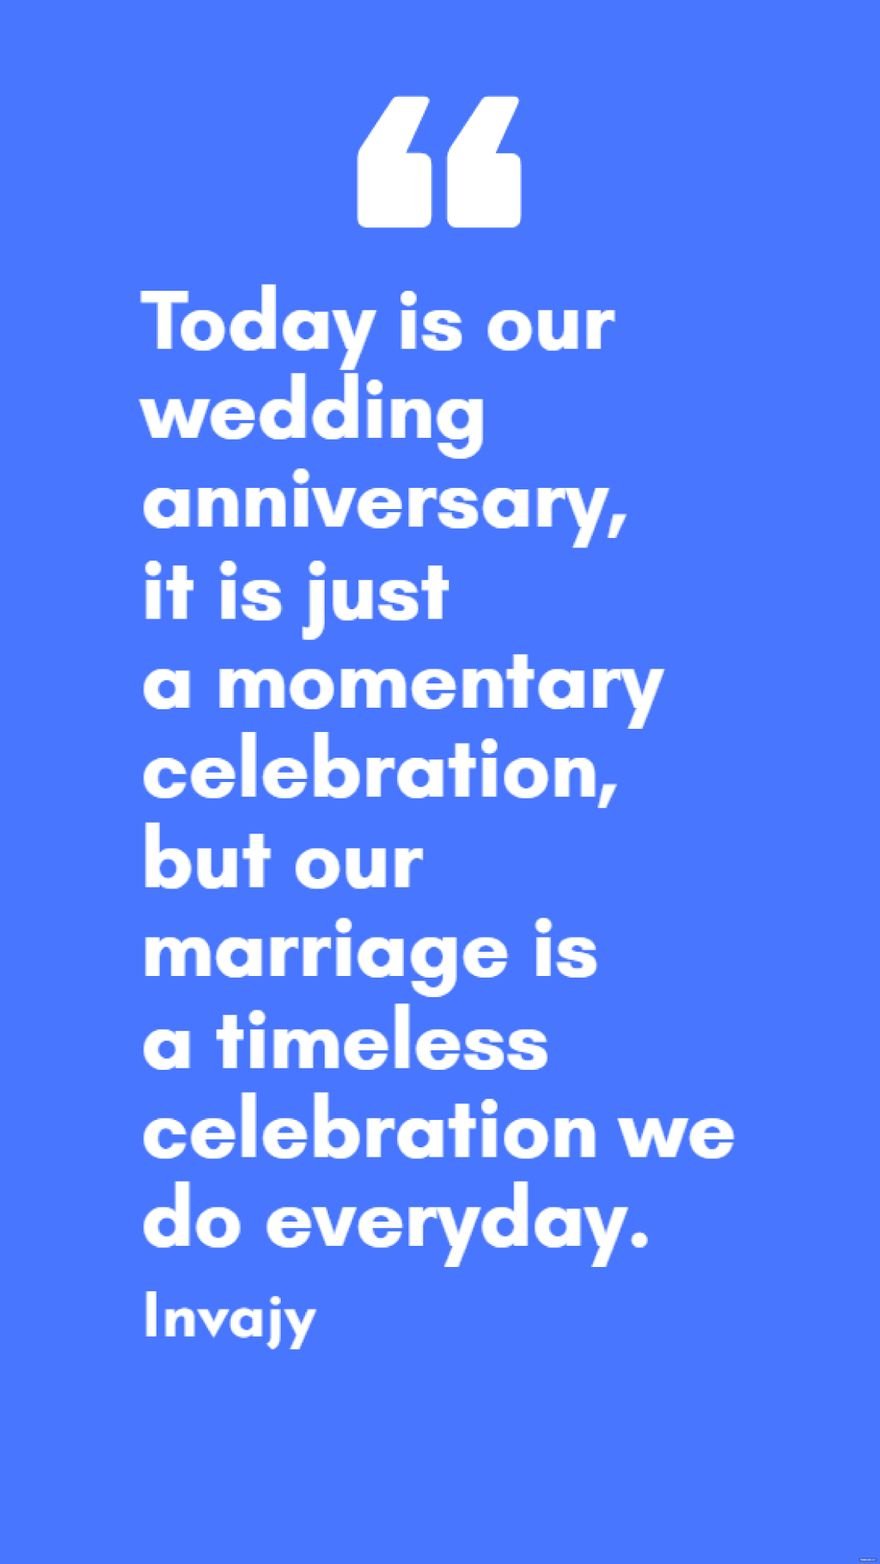 Free Invajy - Today is our wedding anniversary, it is just a momentary celebration, but our marriage is a timeless celebration we do everyday. in JPG